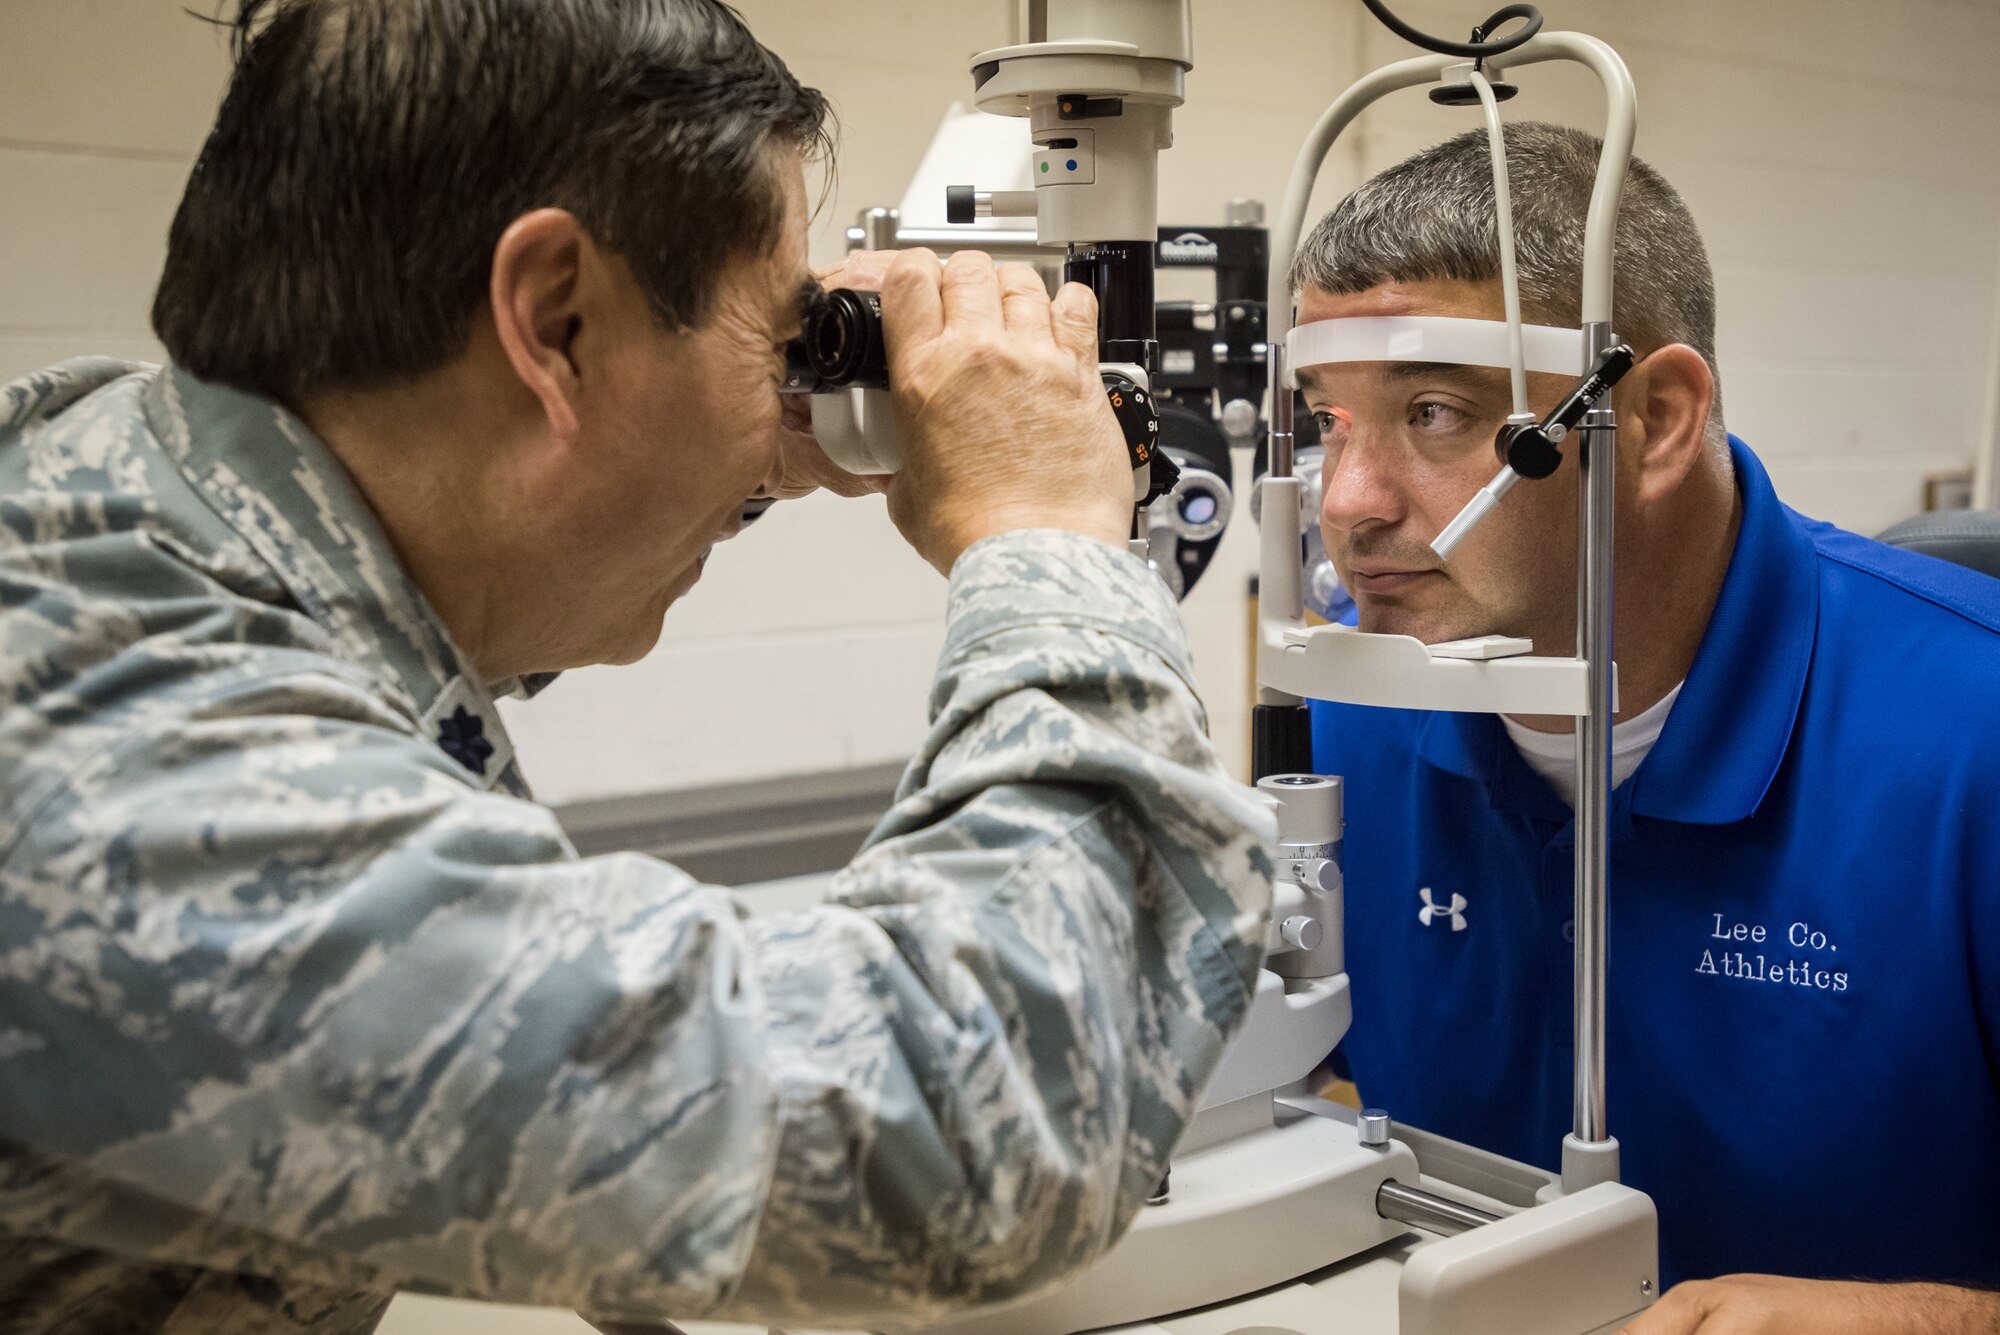 U.S. Air Force Lt. Col. Ronald Short, an optometrist from the California Air National Guard’s 163rd Attack Wing, conducts an eye exam on a local resident at a no-cost health-care clinic at Lee County High School in Beattyville, Ky., June 15, 2018. The clinic is one of four that was staffed by military health-care professionals in Eastern Kentucky from June 15 to June 24 as part of an Innovative Readiness Training mission called Operation Bobcat. The mission provided military forces with crucial expeditionary training while offering no-cost medical, dental and optometry care to area residents. (U.S. Air National Guard photo by Lt. Col. Dale Greer)